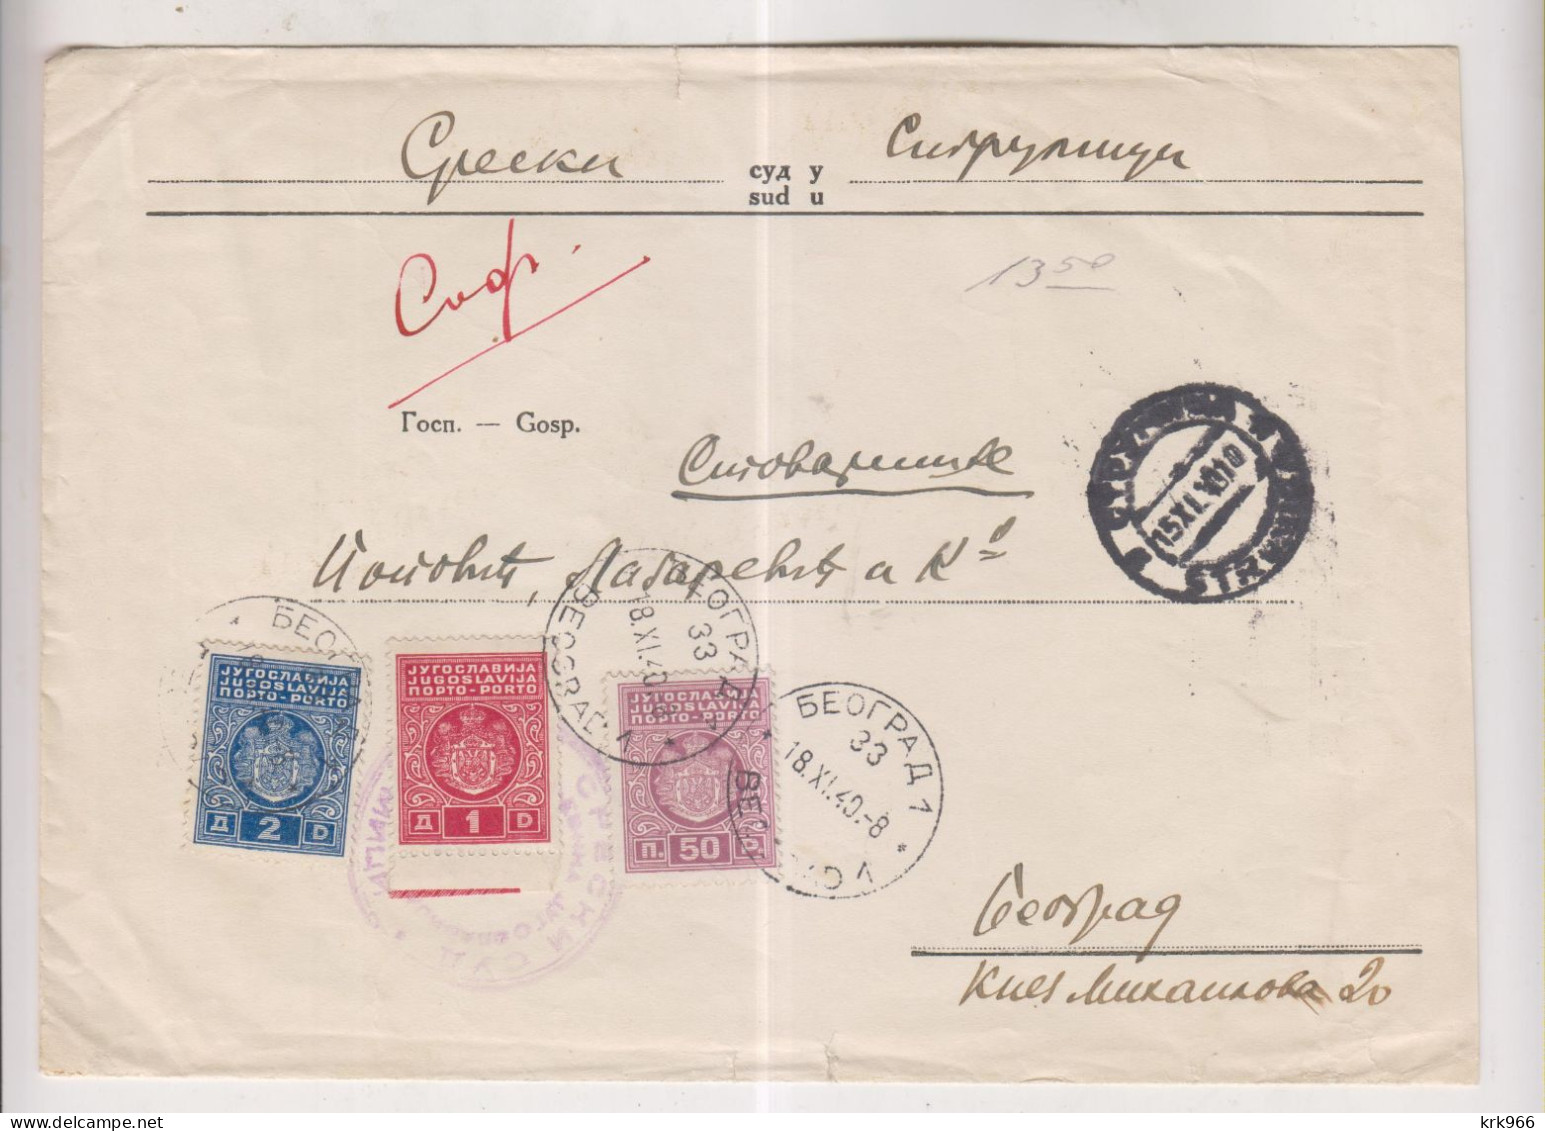 YUGOSLAVIA,1940 SURDULICA Nice Official Cover To Beograd Postage Due - Covers & Documents